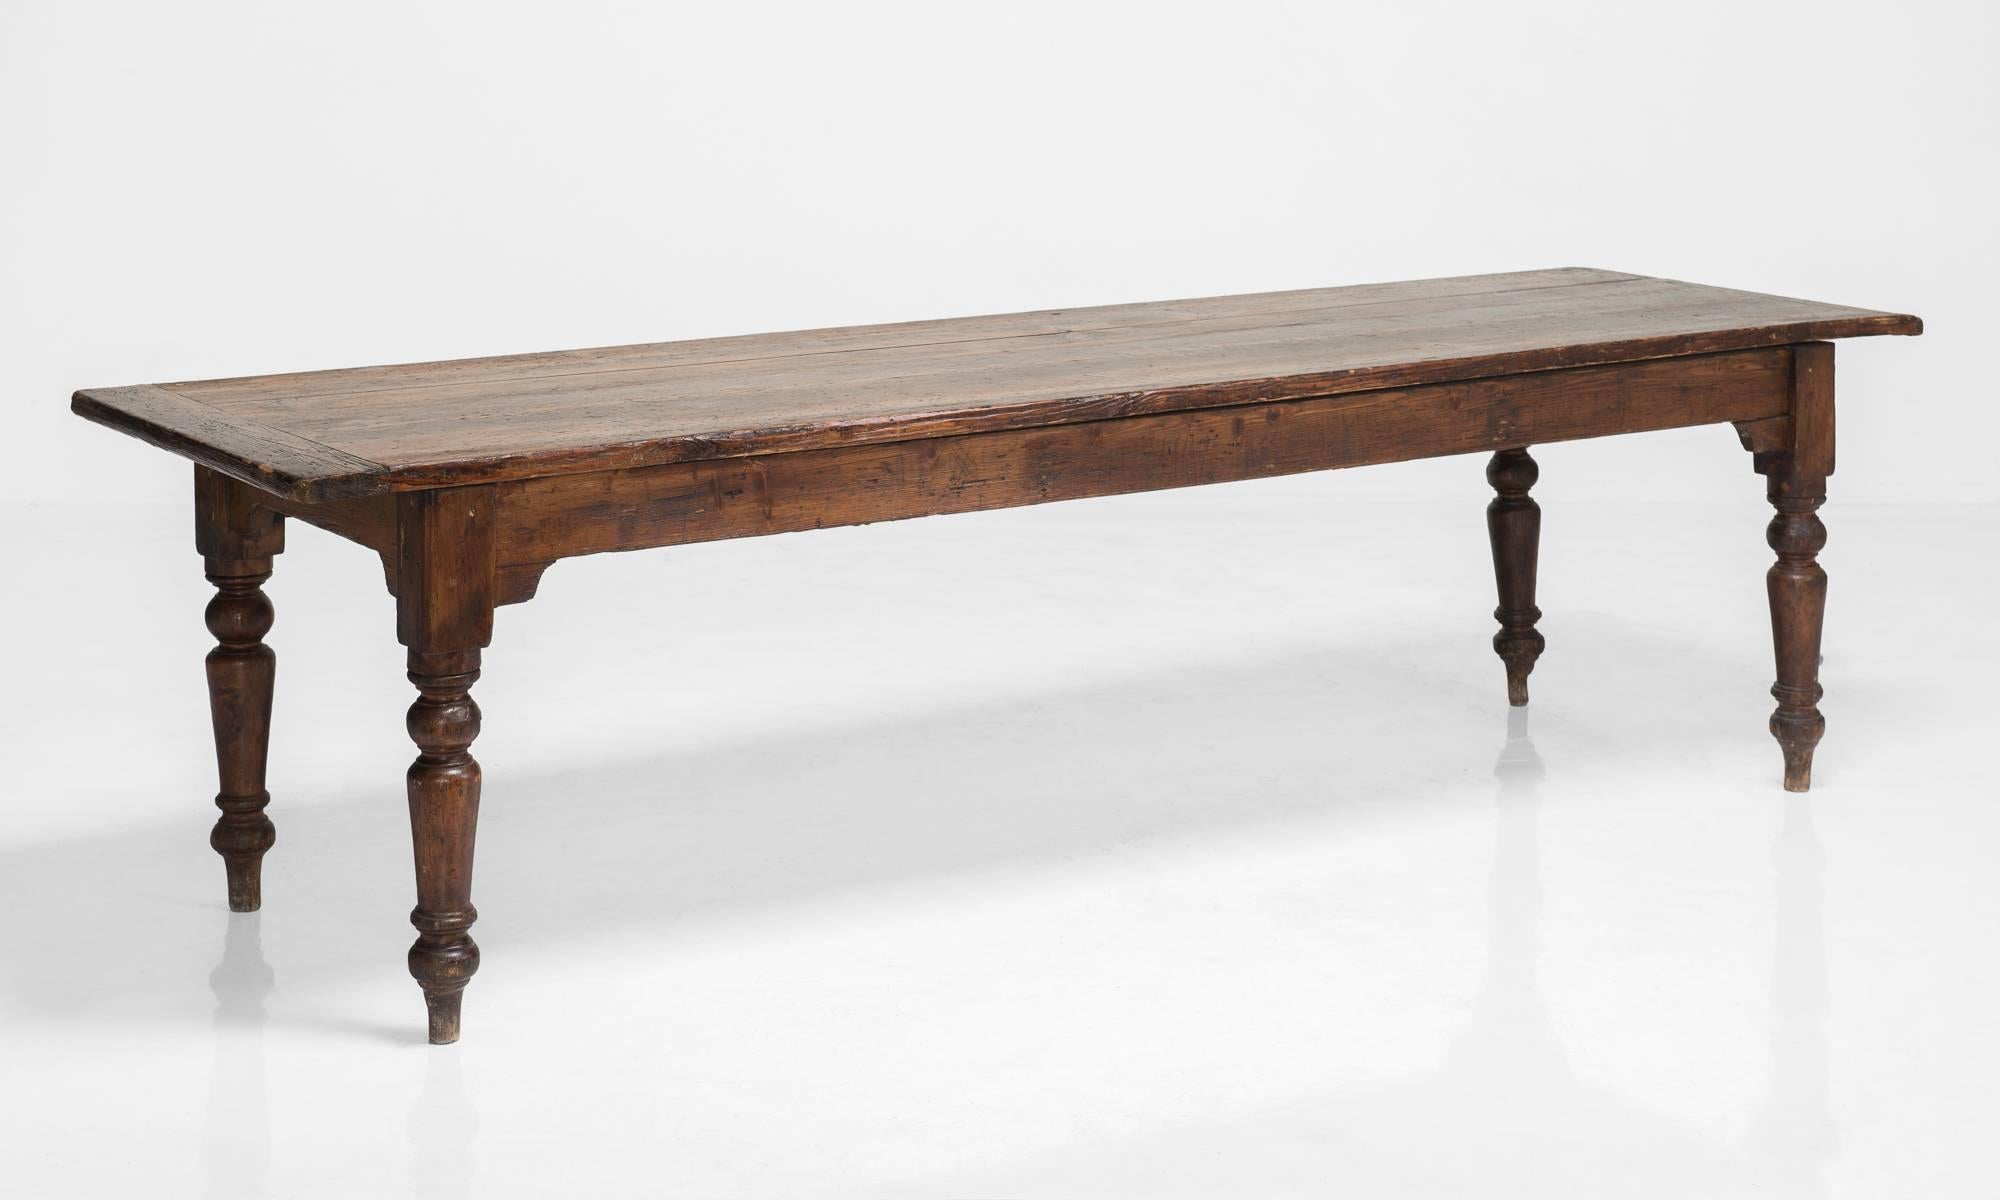 Pine farmhouse table, circa 1850.

Elegant and rustic dining table with sturdy base and turned legs.